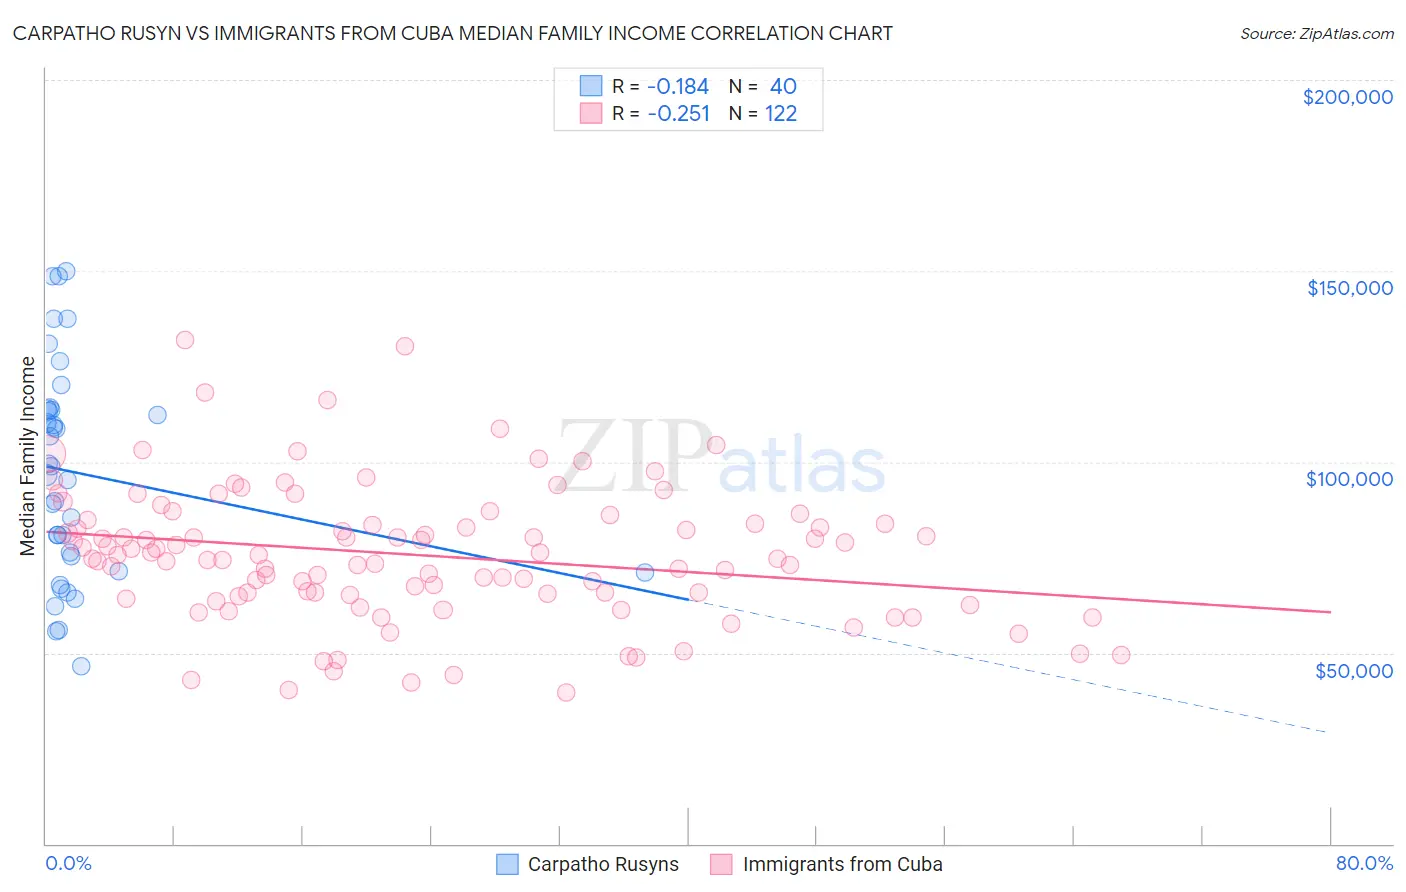 Carpatho Rusyn vs Immigrants from Cuba Median Family Income